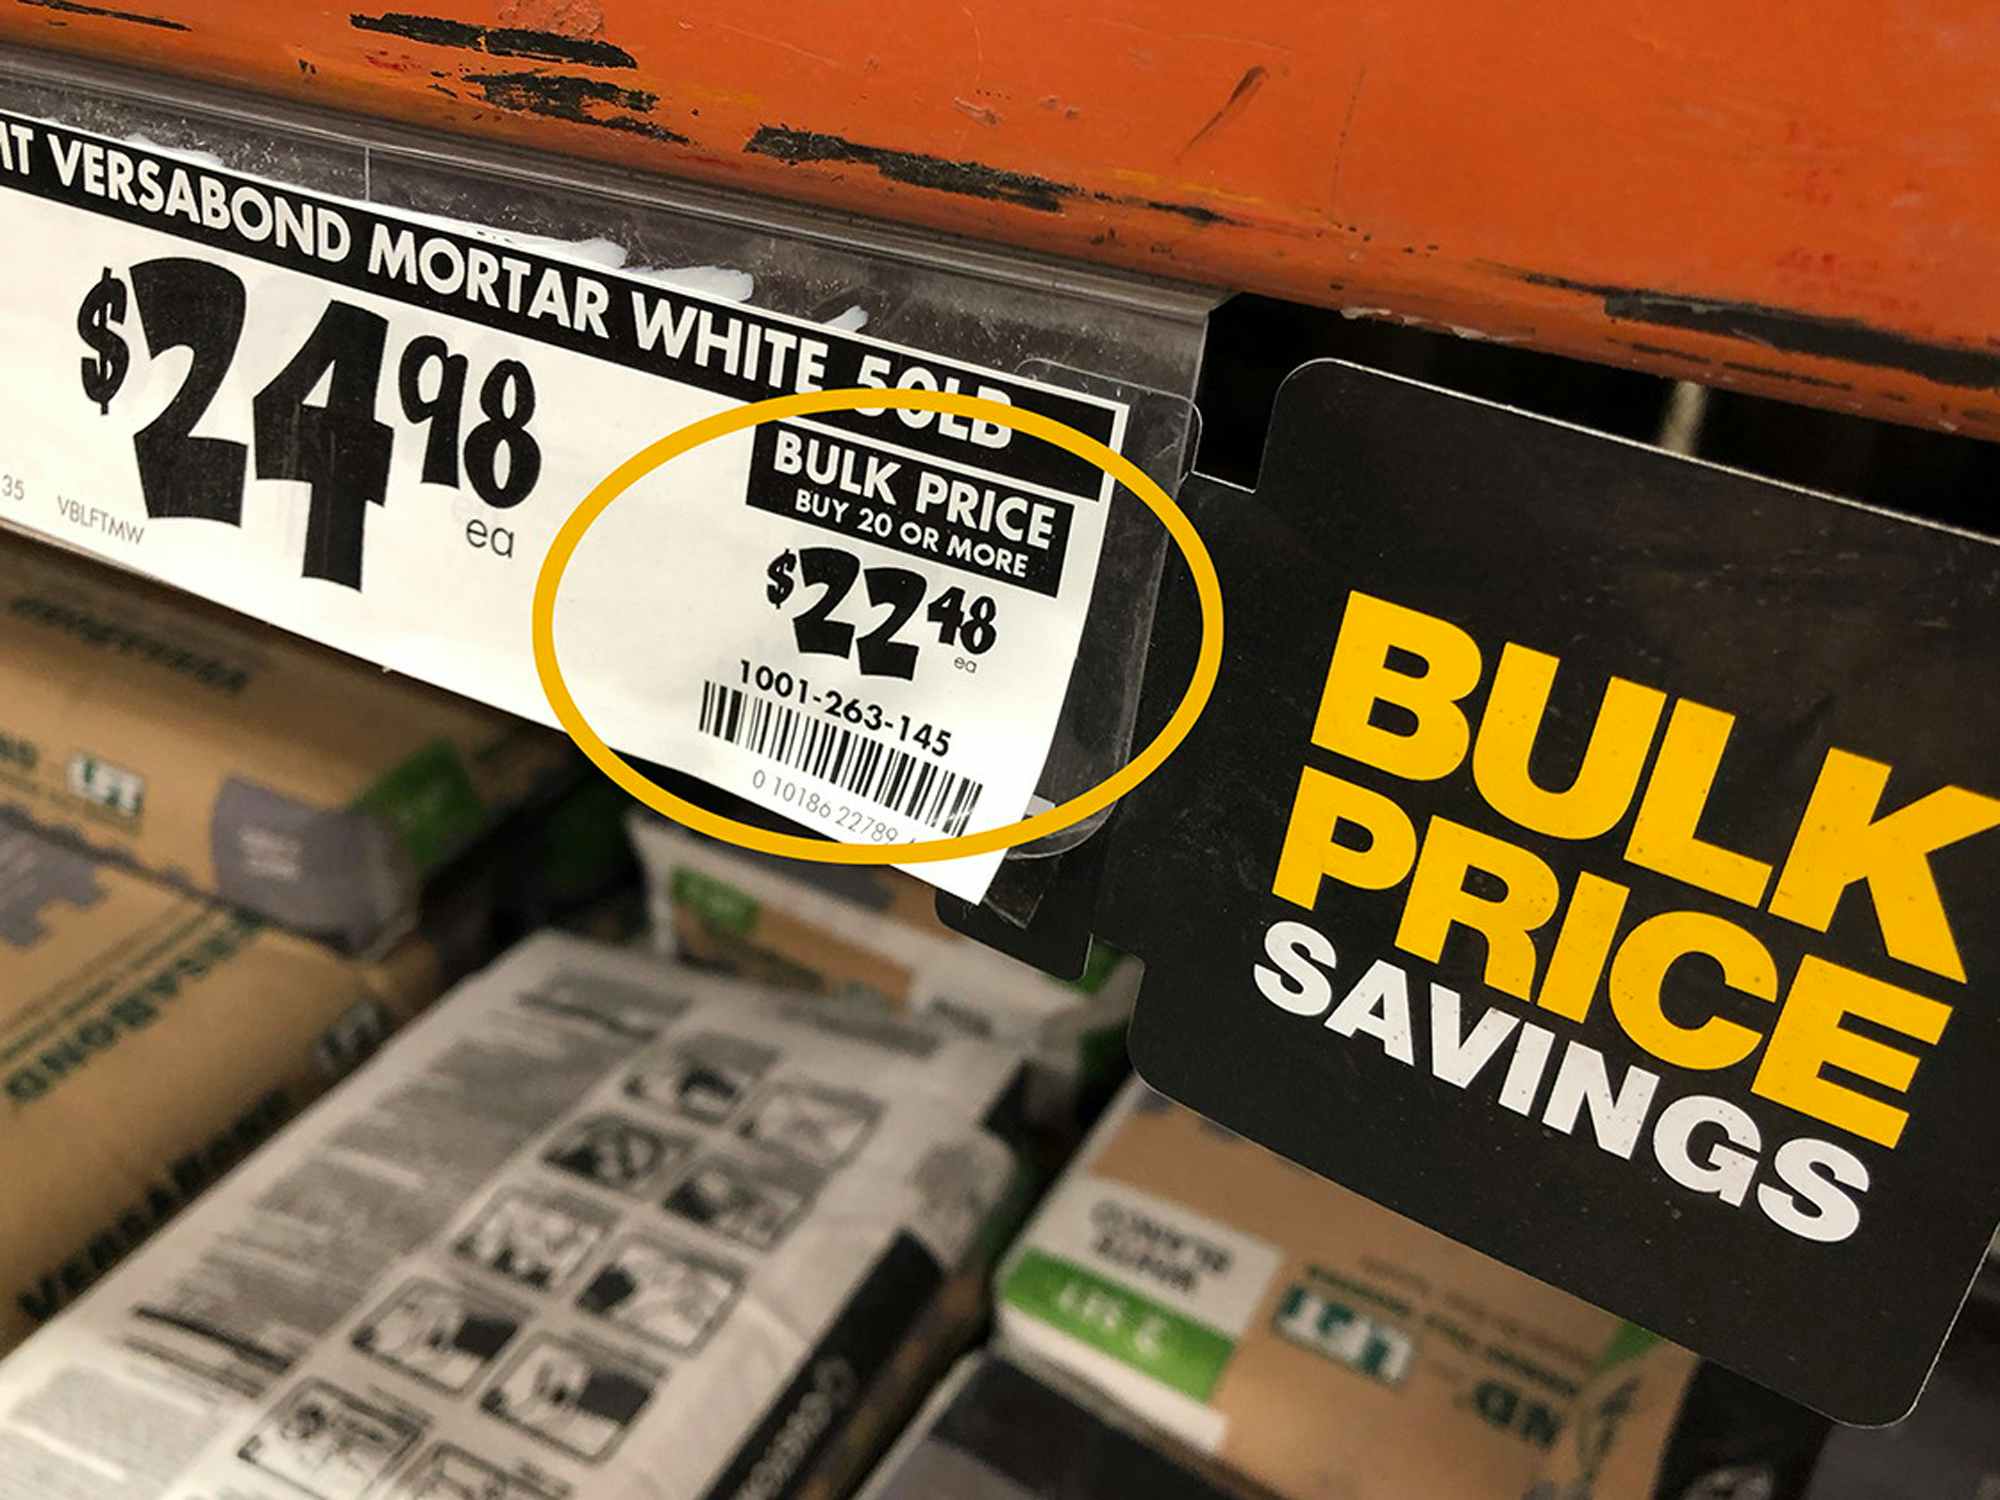 Home depot price tag for mortar at $24.98 a 50 pound bag, with bulk price of $22.48 if you buy 20 or more bags.